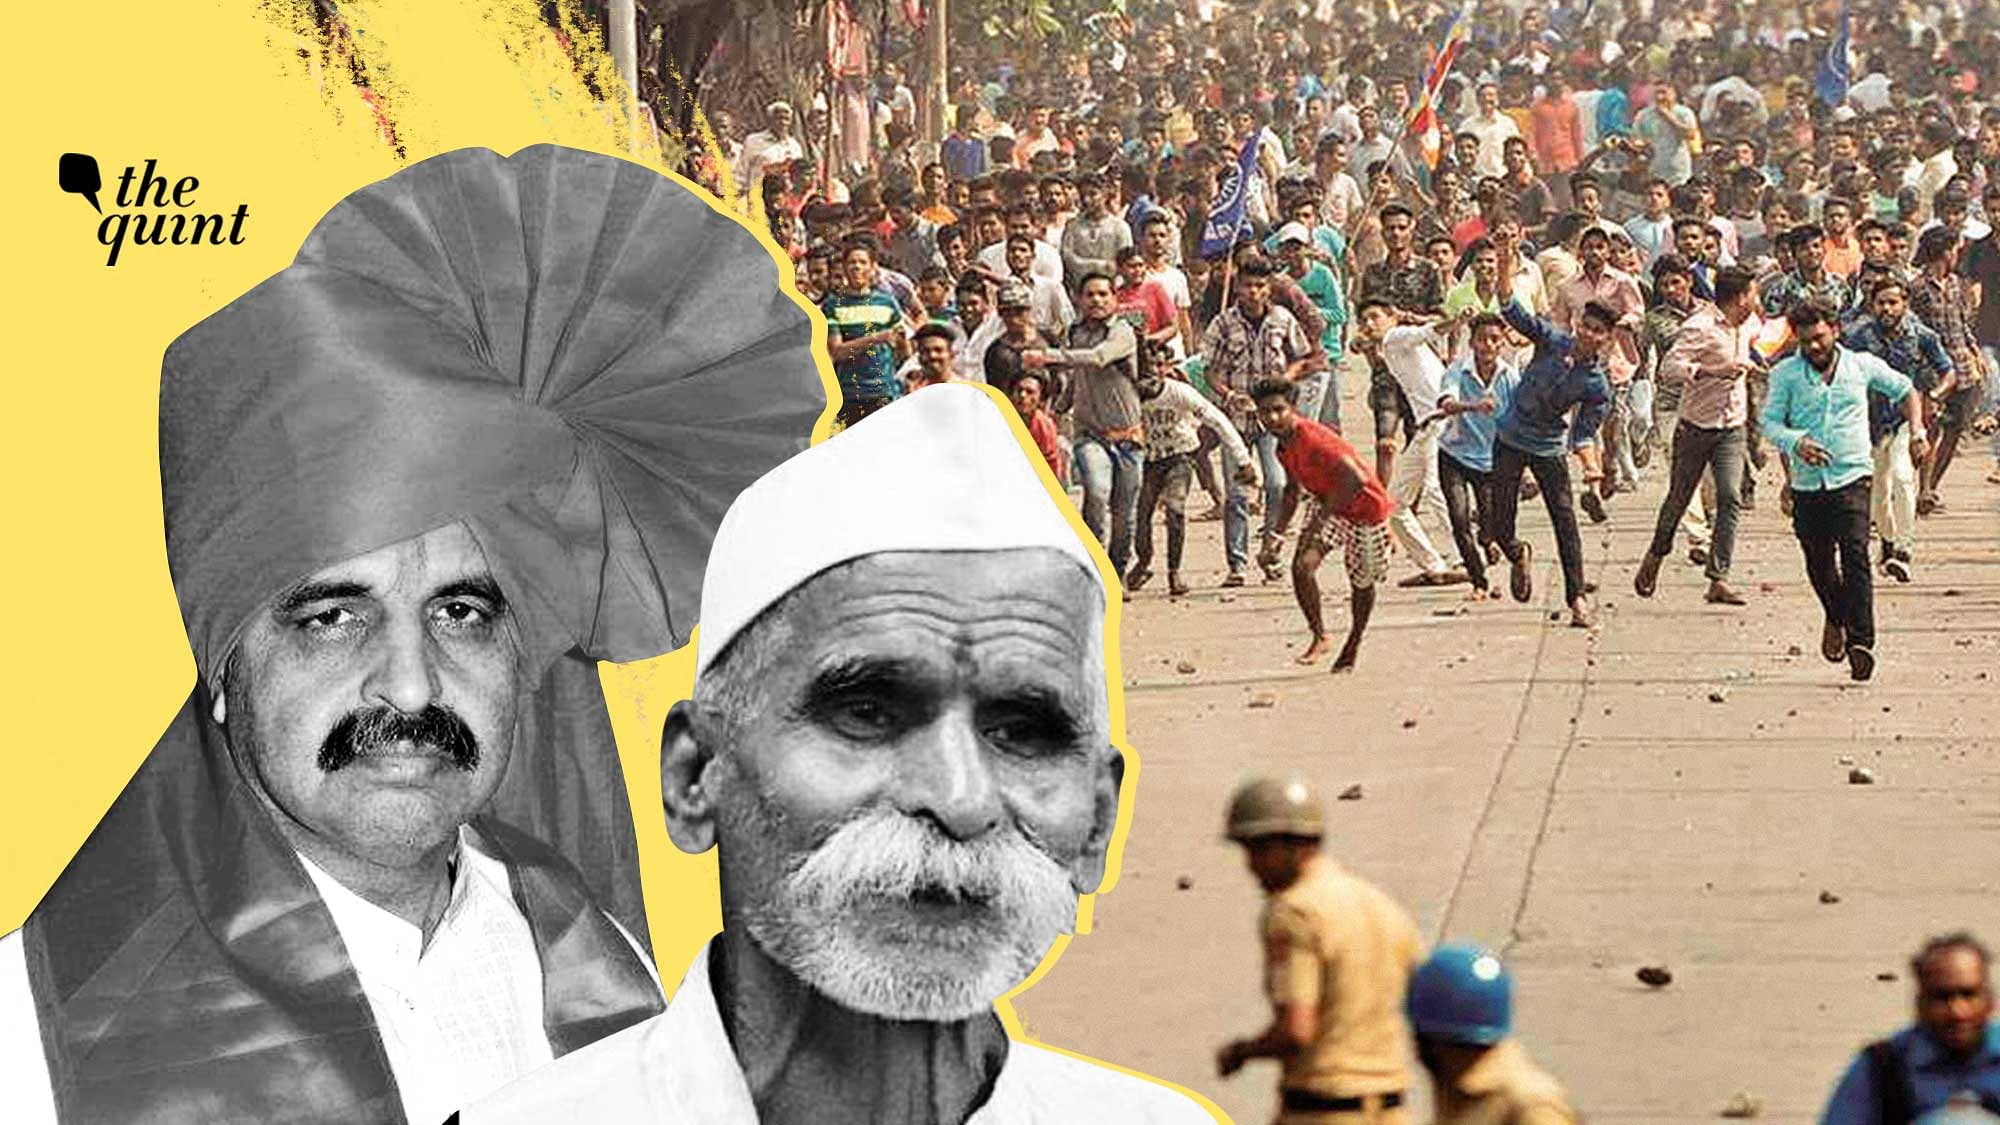 <div class="paragraphs"><p>In 2018, an FIR was filed against Hindutva leaders Sambhaji Bhide and Milind Ekbote allegedly for 'orchestrating' the Bhima Koregaon violence.</p></div>